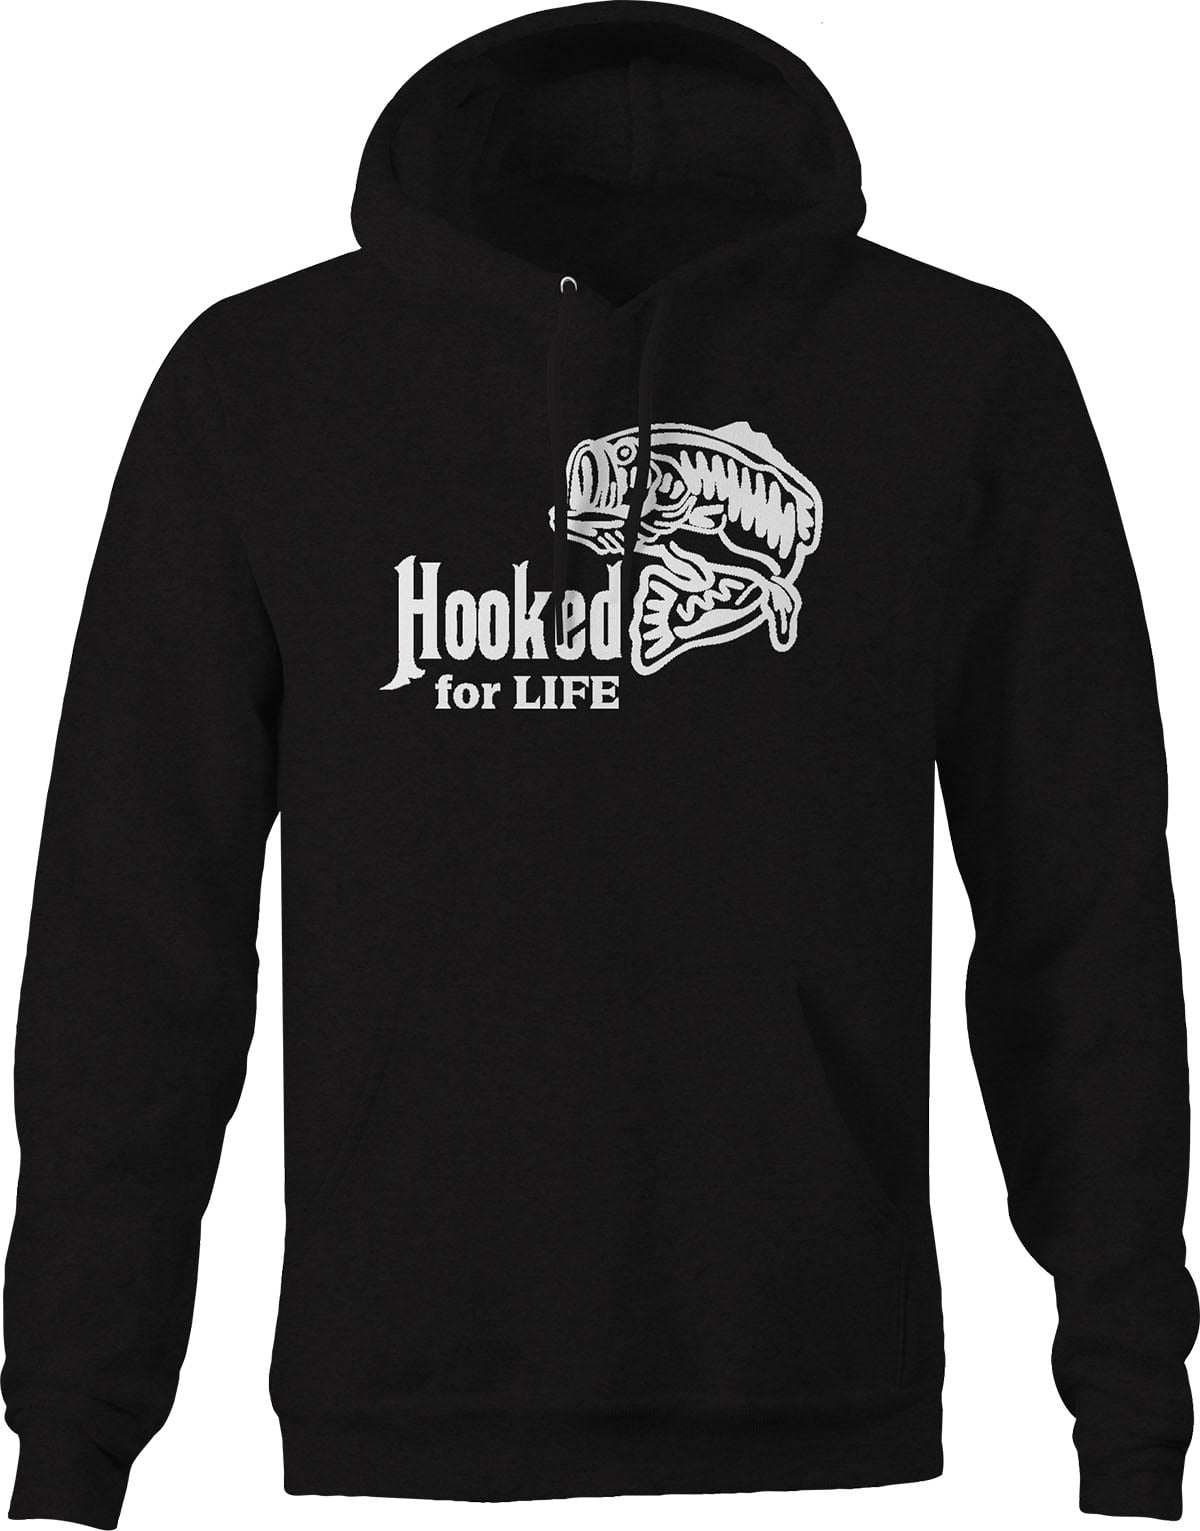 Hooked for Life Bass Fishing Sweatshirt for Men Small Black